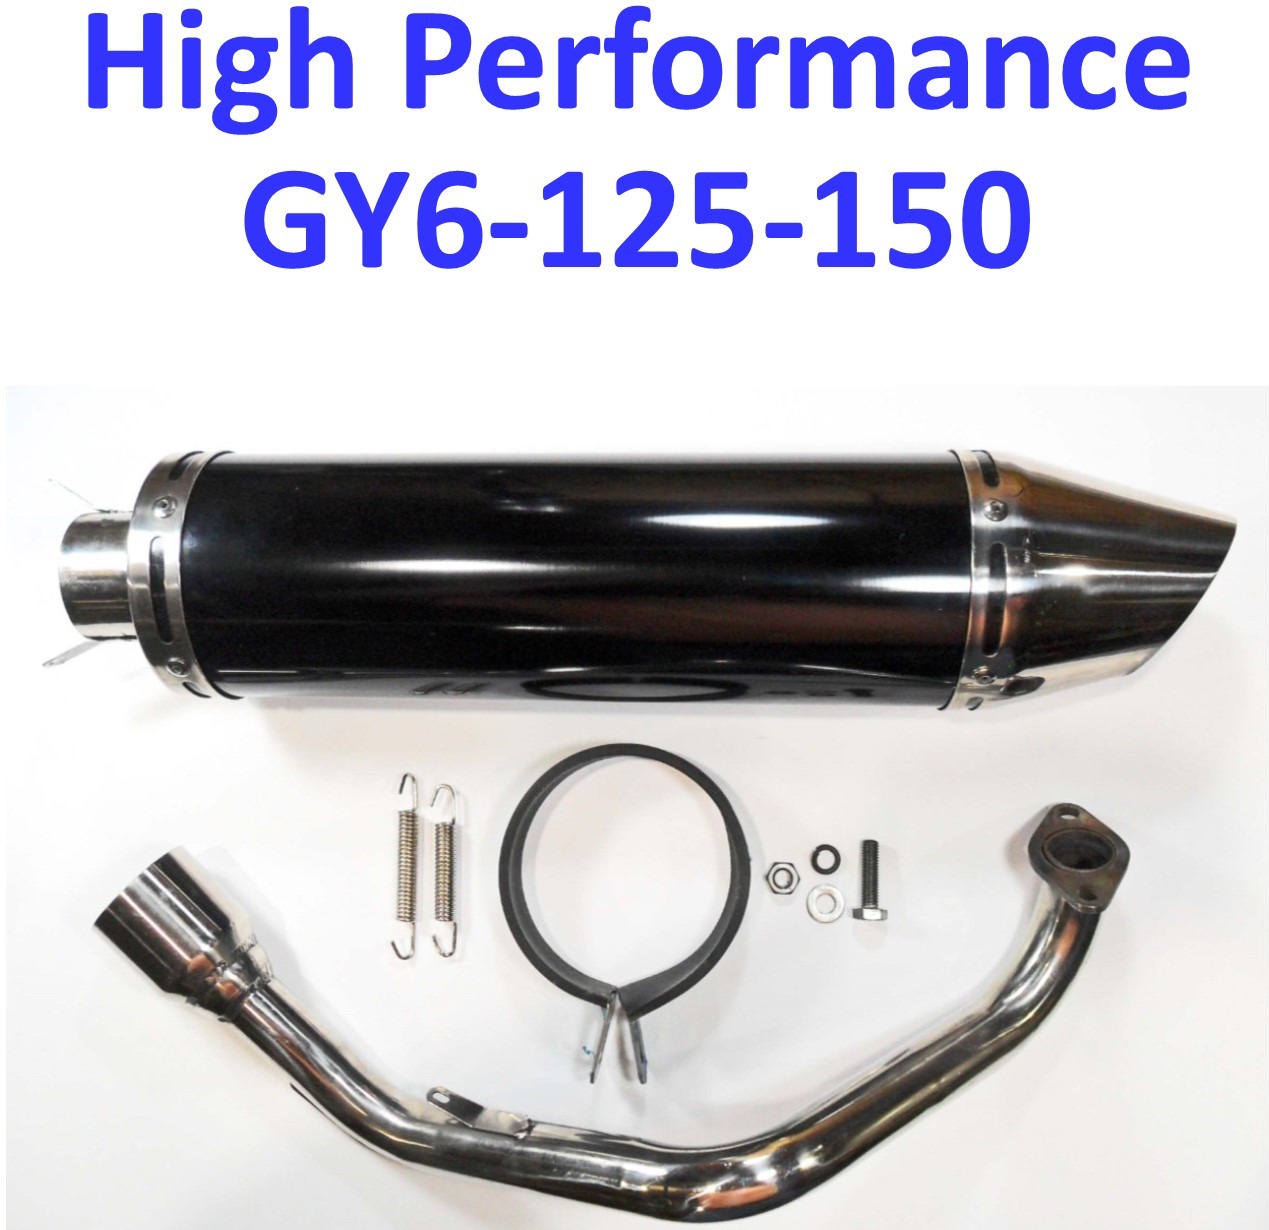 Exhaust Pipe HIGH PERFORMANCE - BLACK/CHROME Fits Most GY6-125, GY6-150 Chinese Scooters Canister L=340mm D=100mm - Click Image to Close